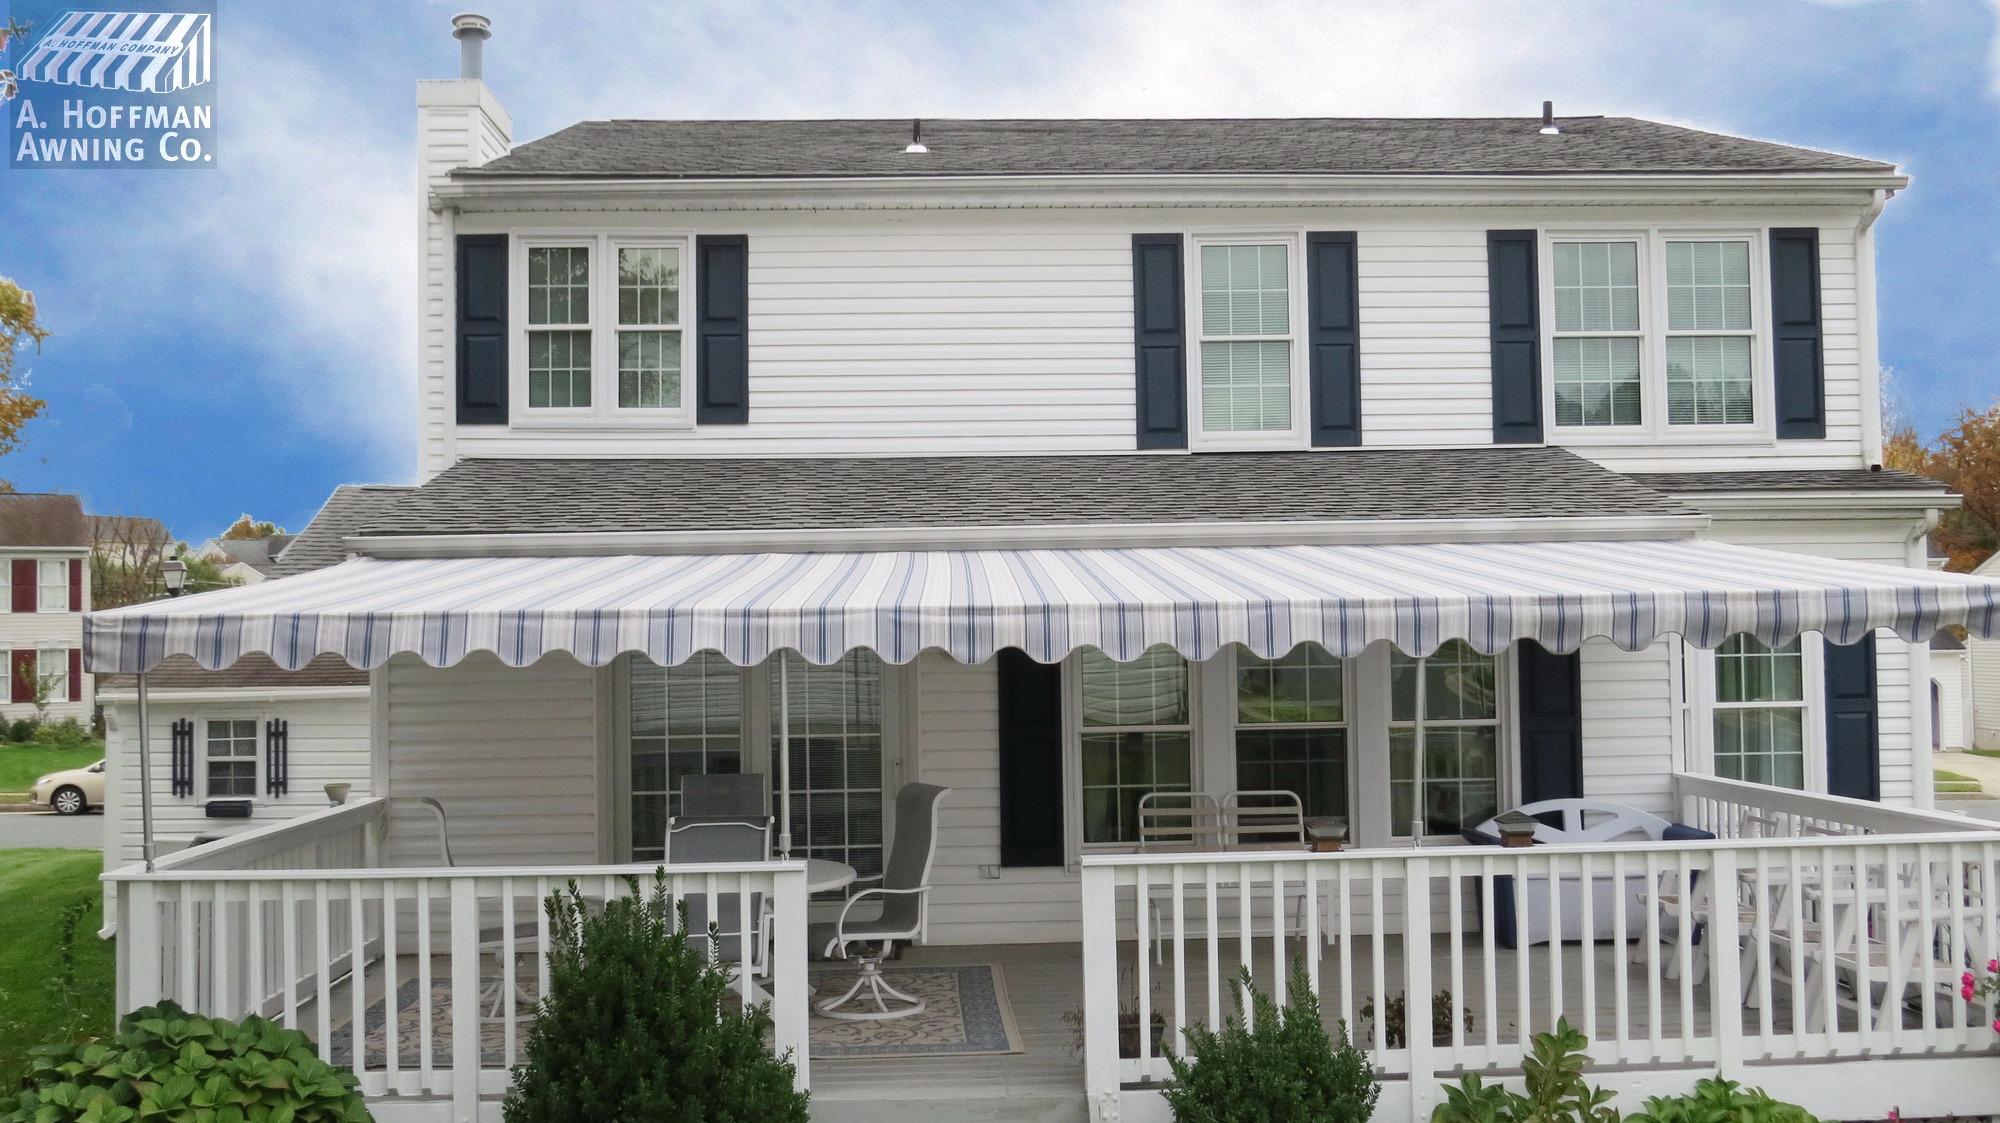 A. Hoffman Awning Co Photo